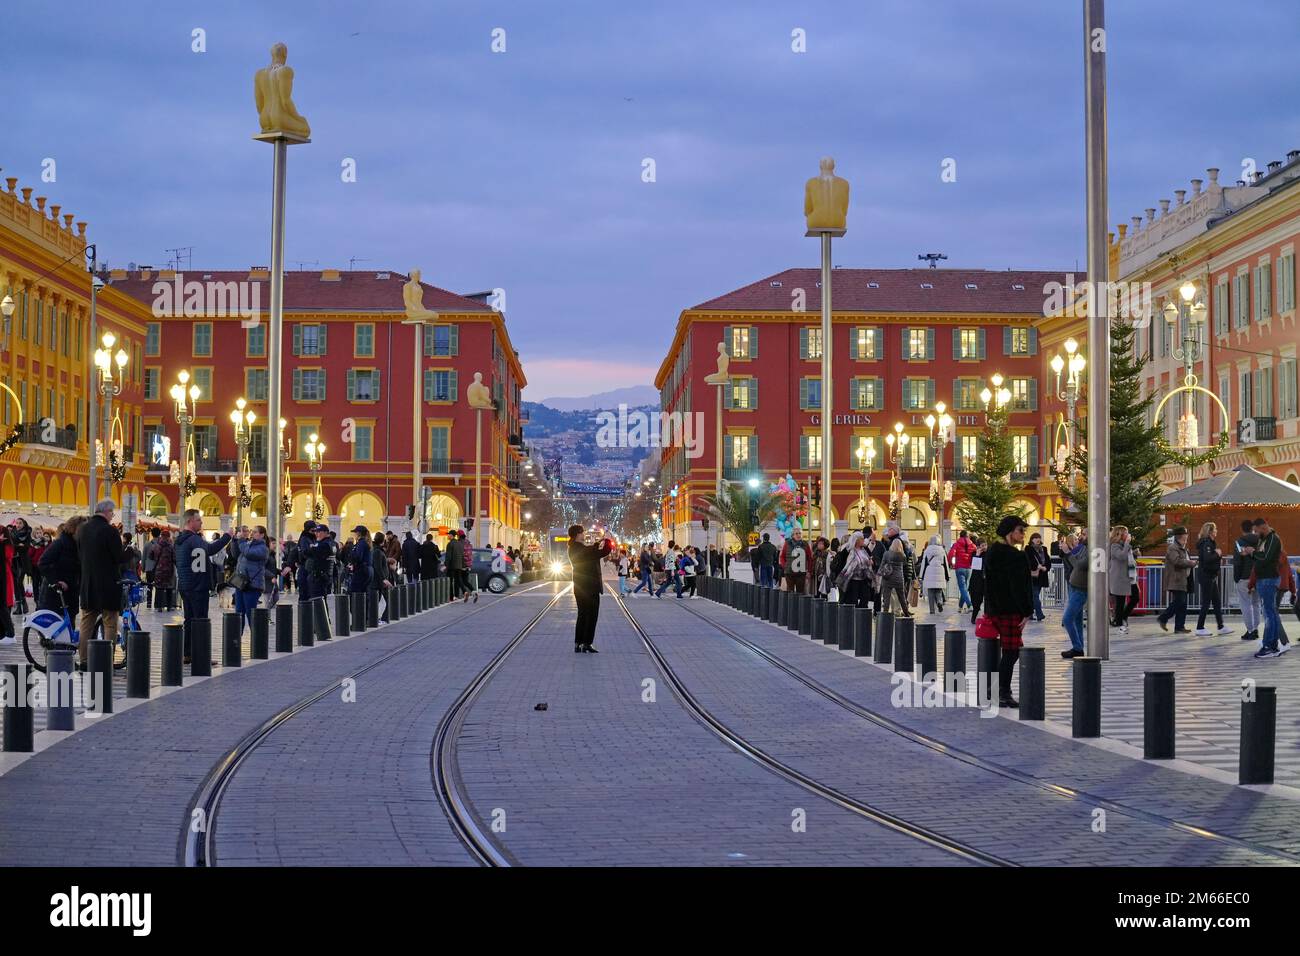 Central Square - Place Massena in Nice, Cote d'Azur, French Riviera. Nice, France - December 2022 Stock Photo